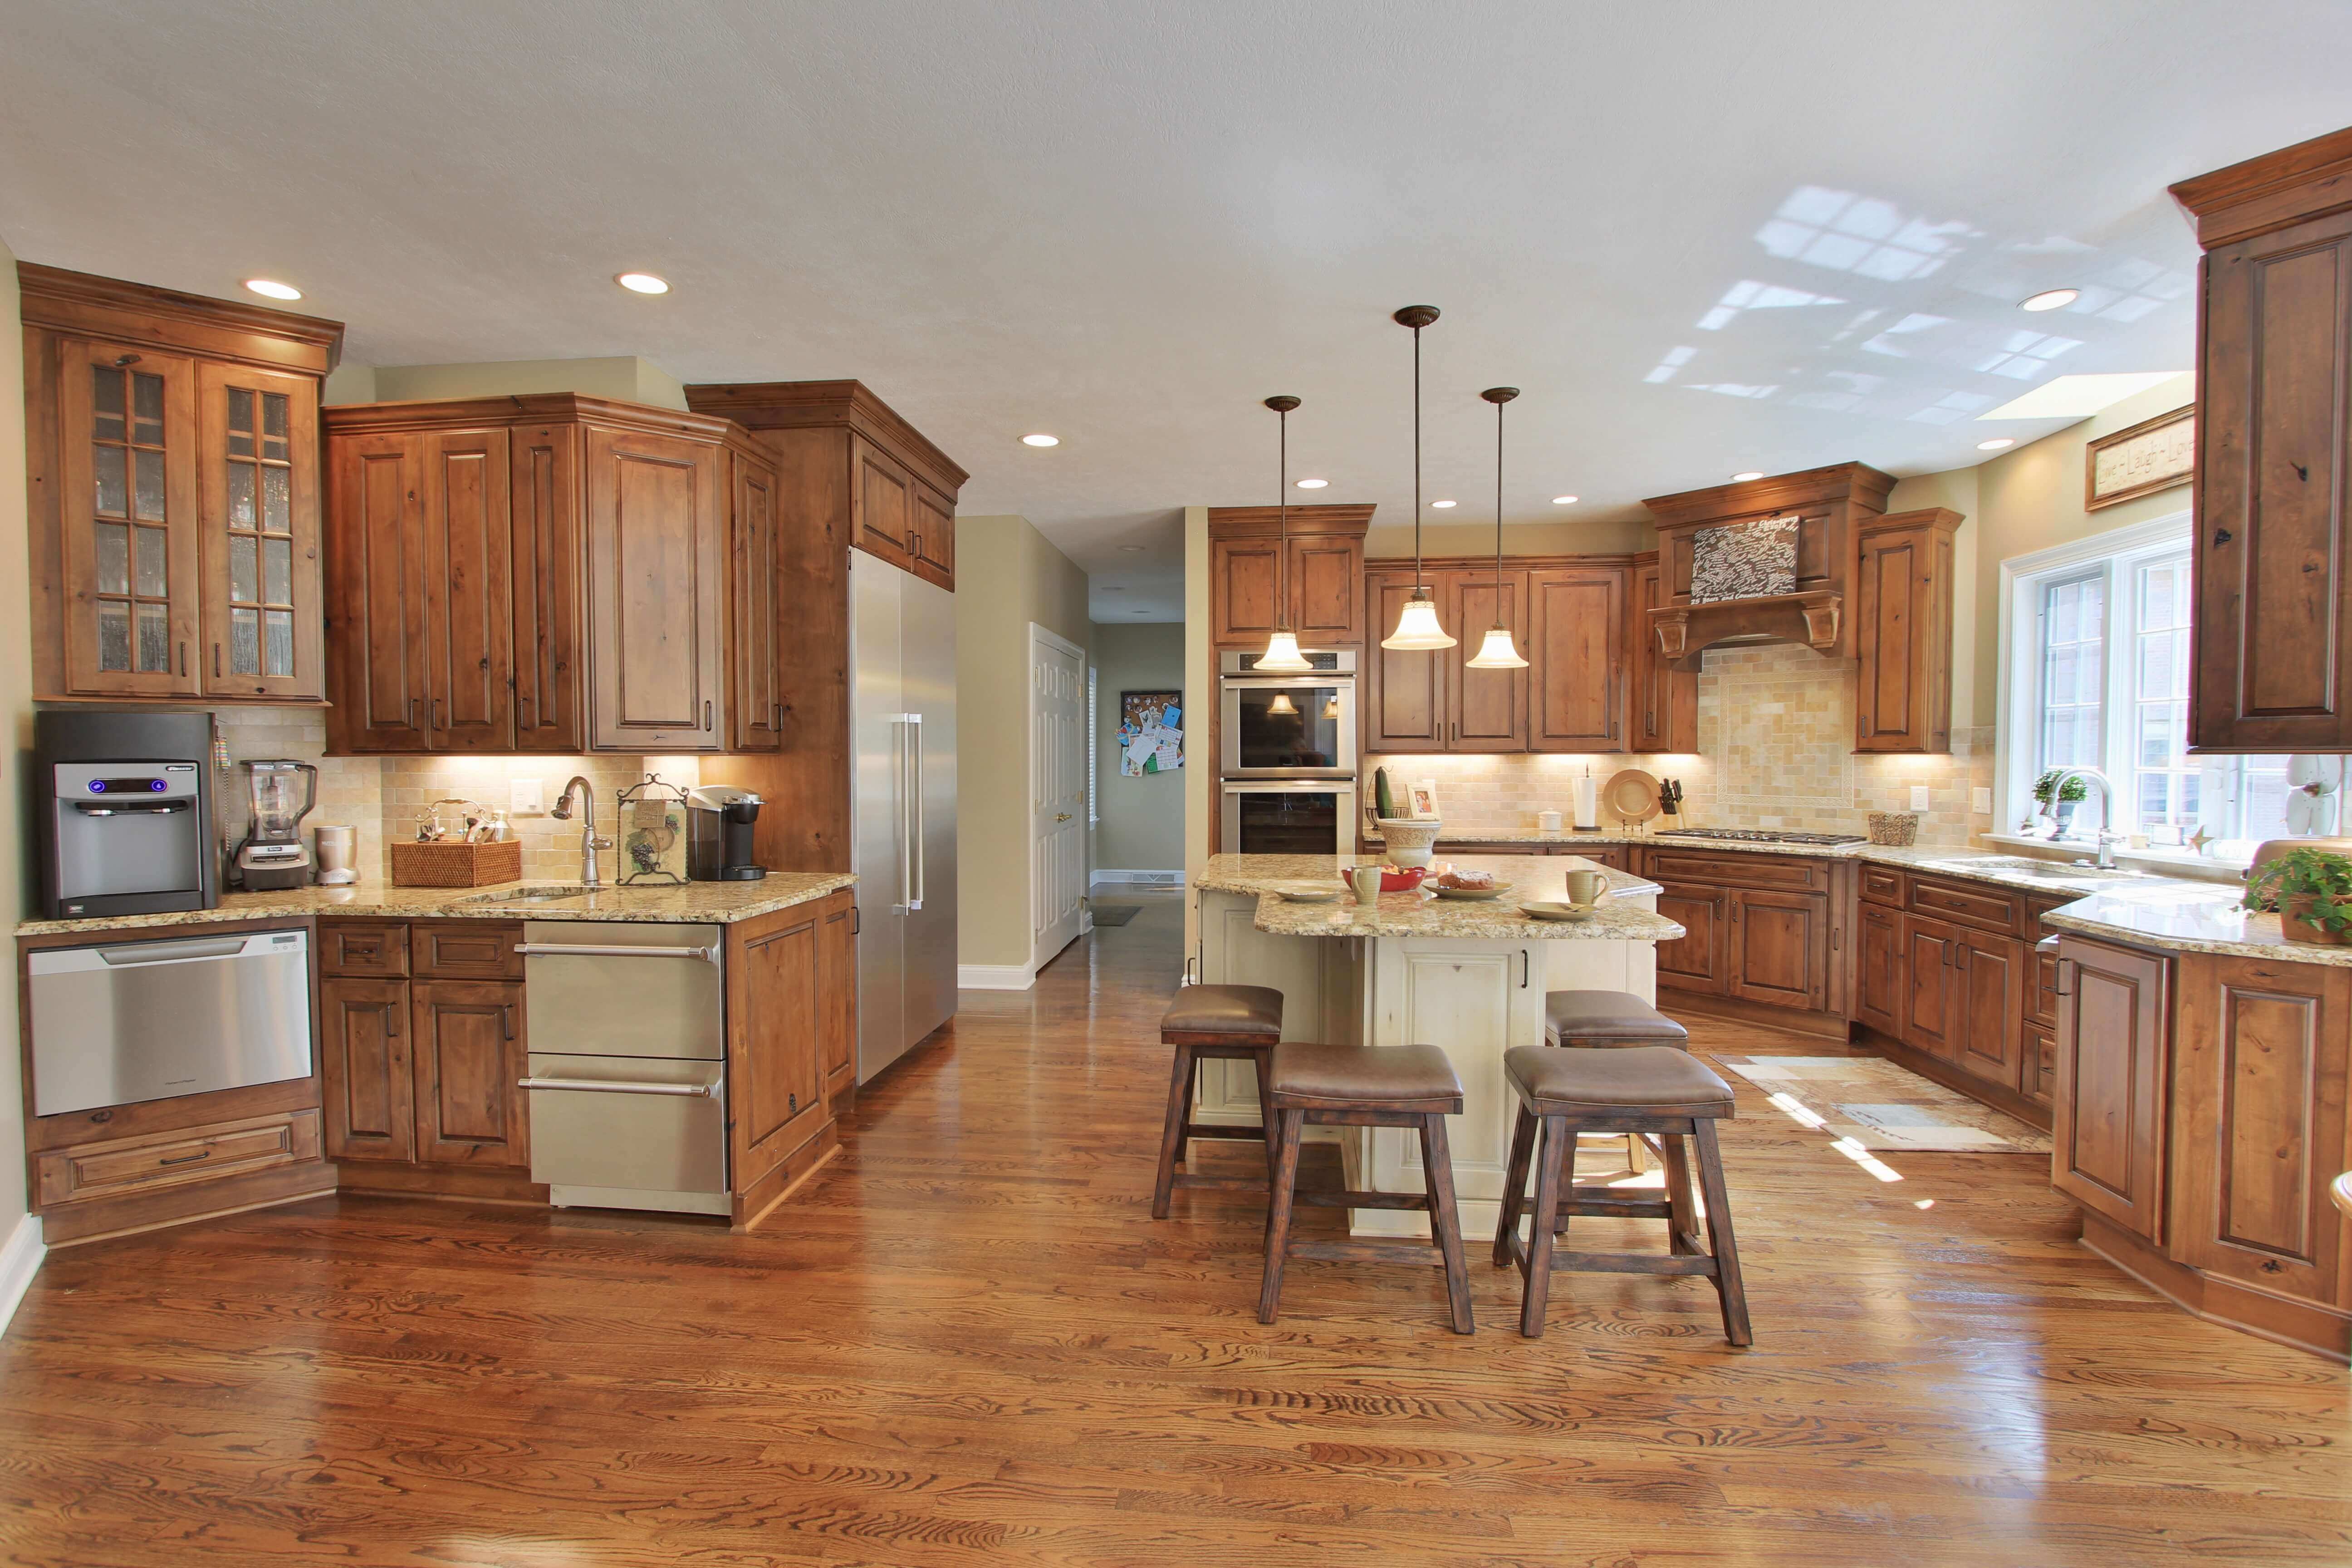 The layout of your kitchen is an important factor to consider when designing a kitchen for entertaining.